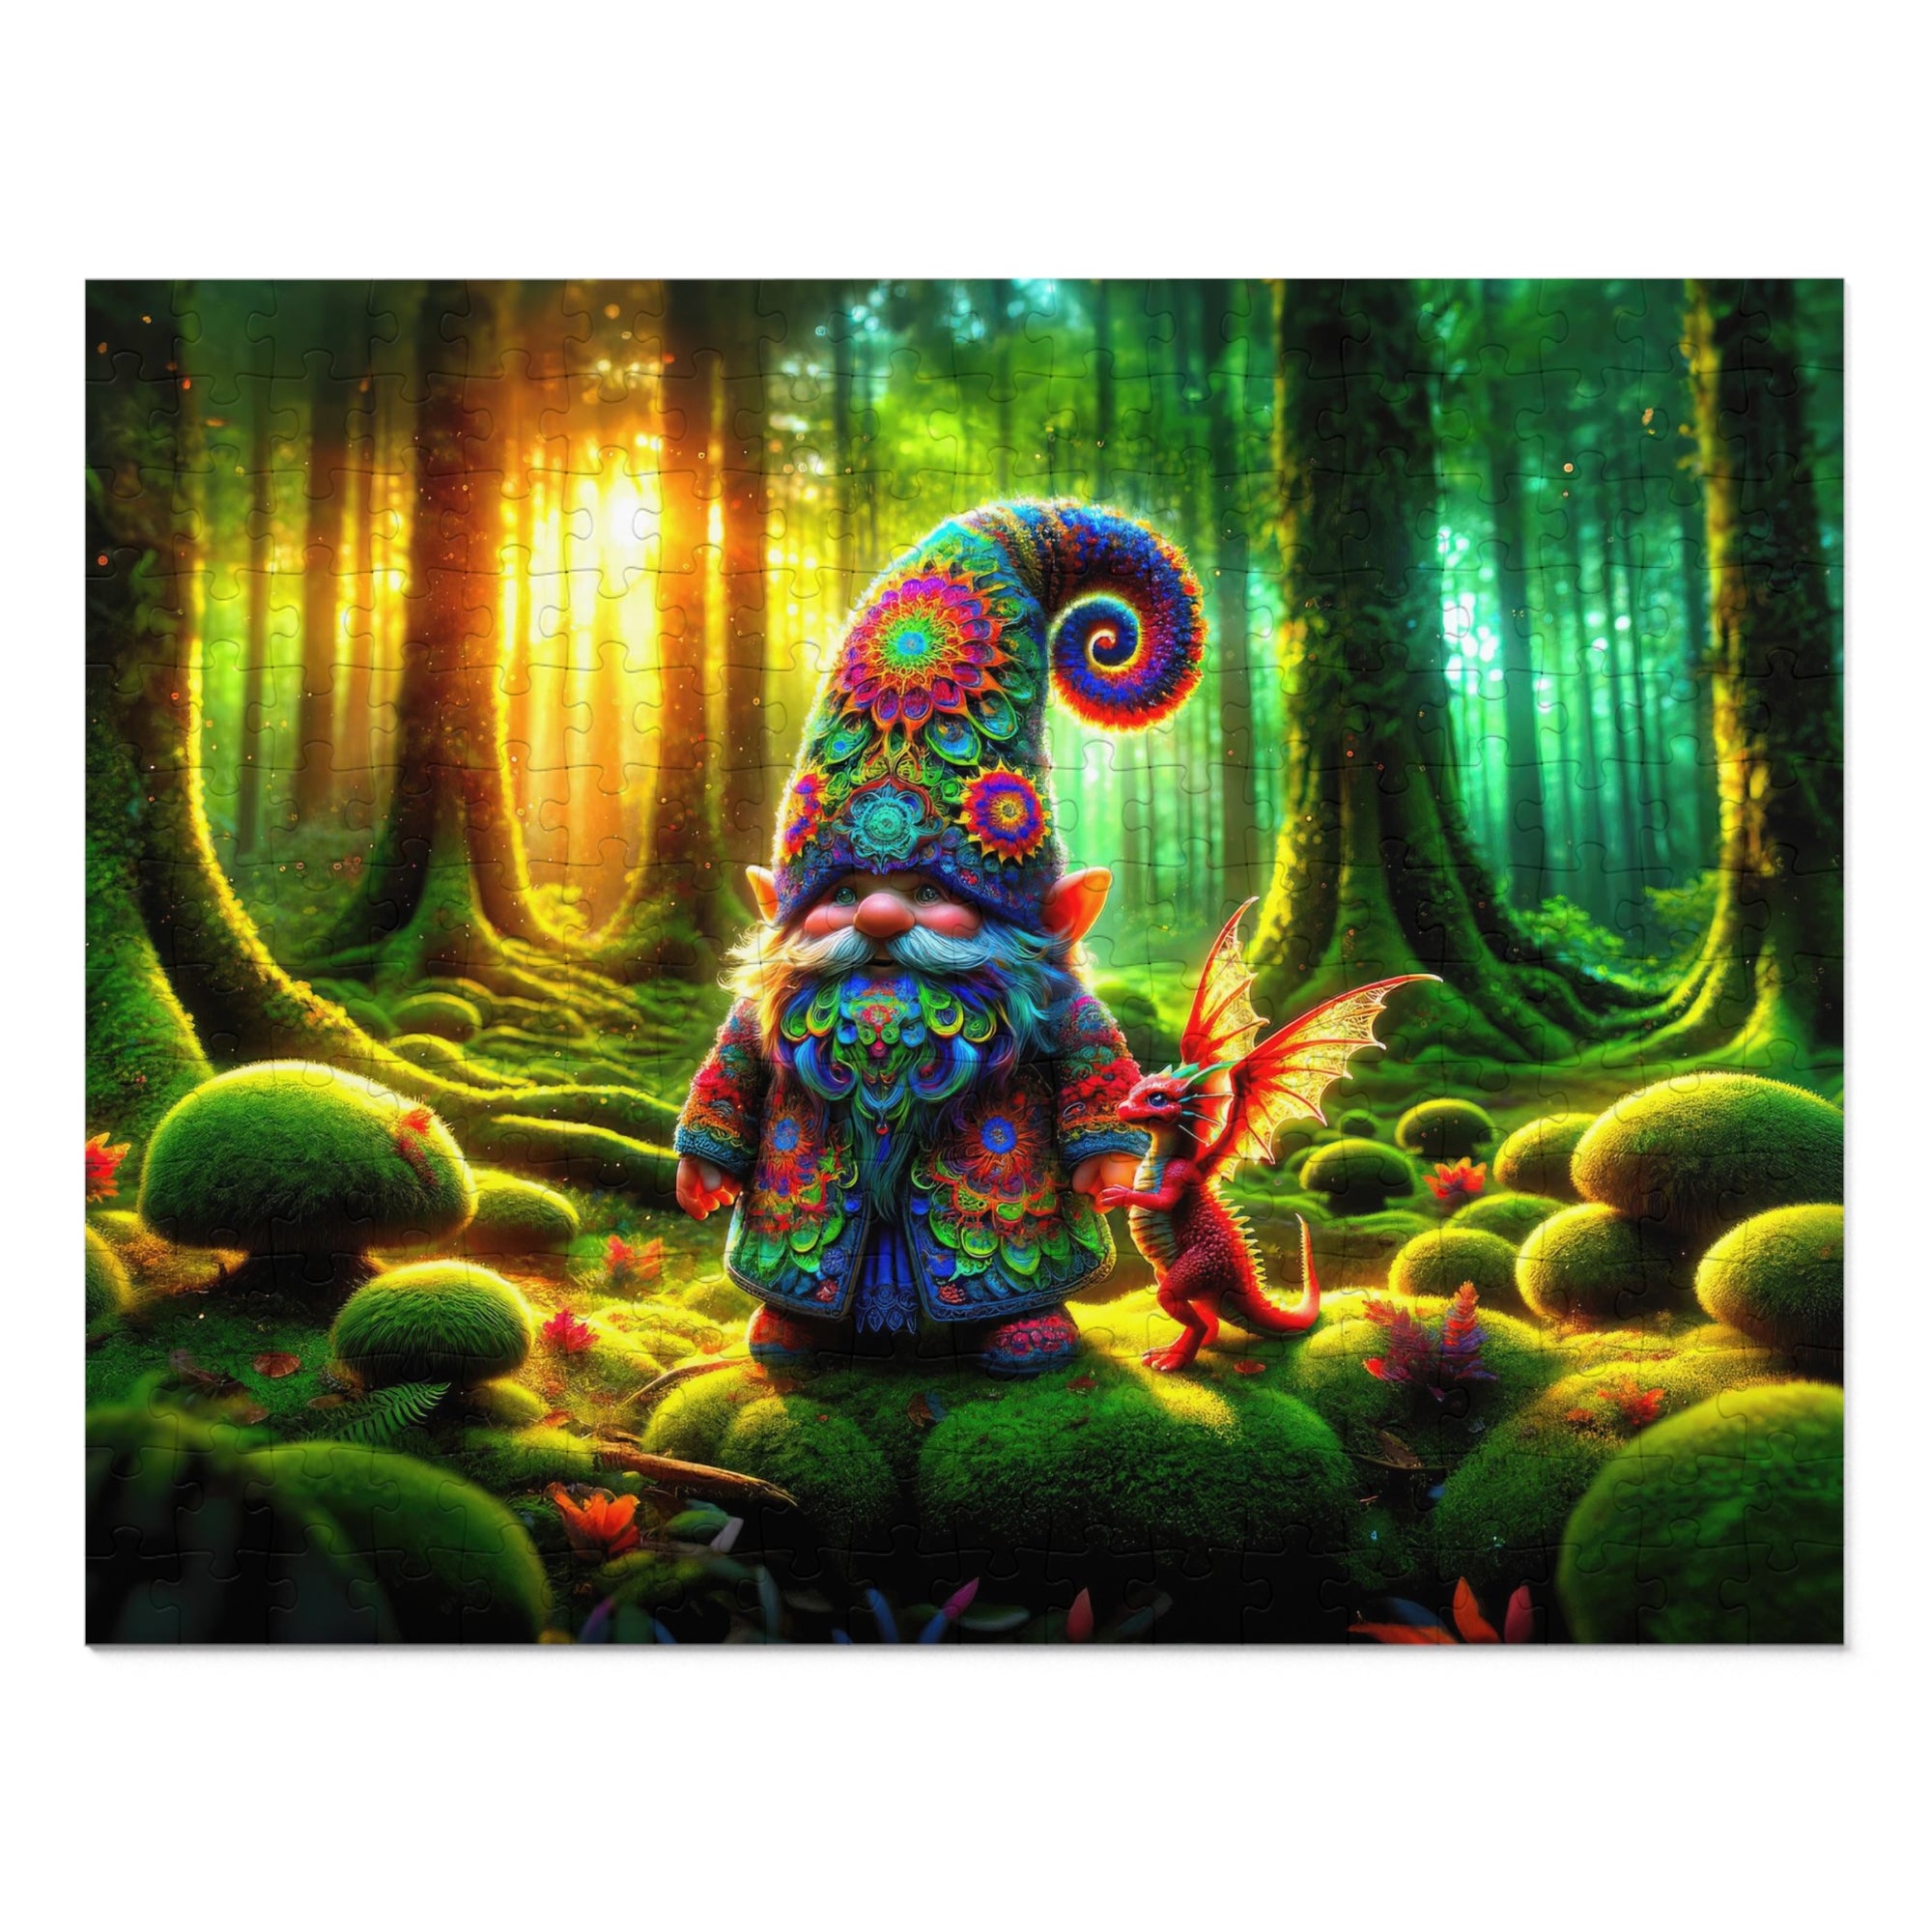 The Gnome's Morning in Enchanted Woods Jigsaw Puzzle